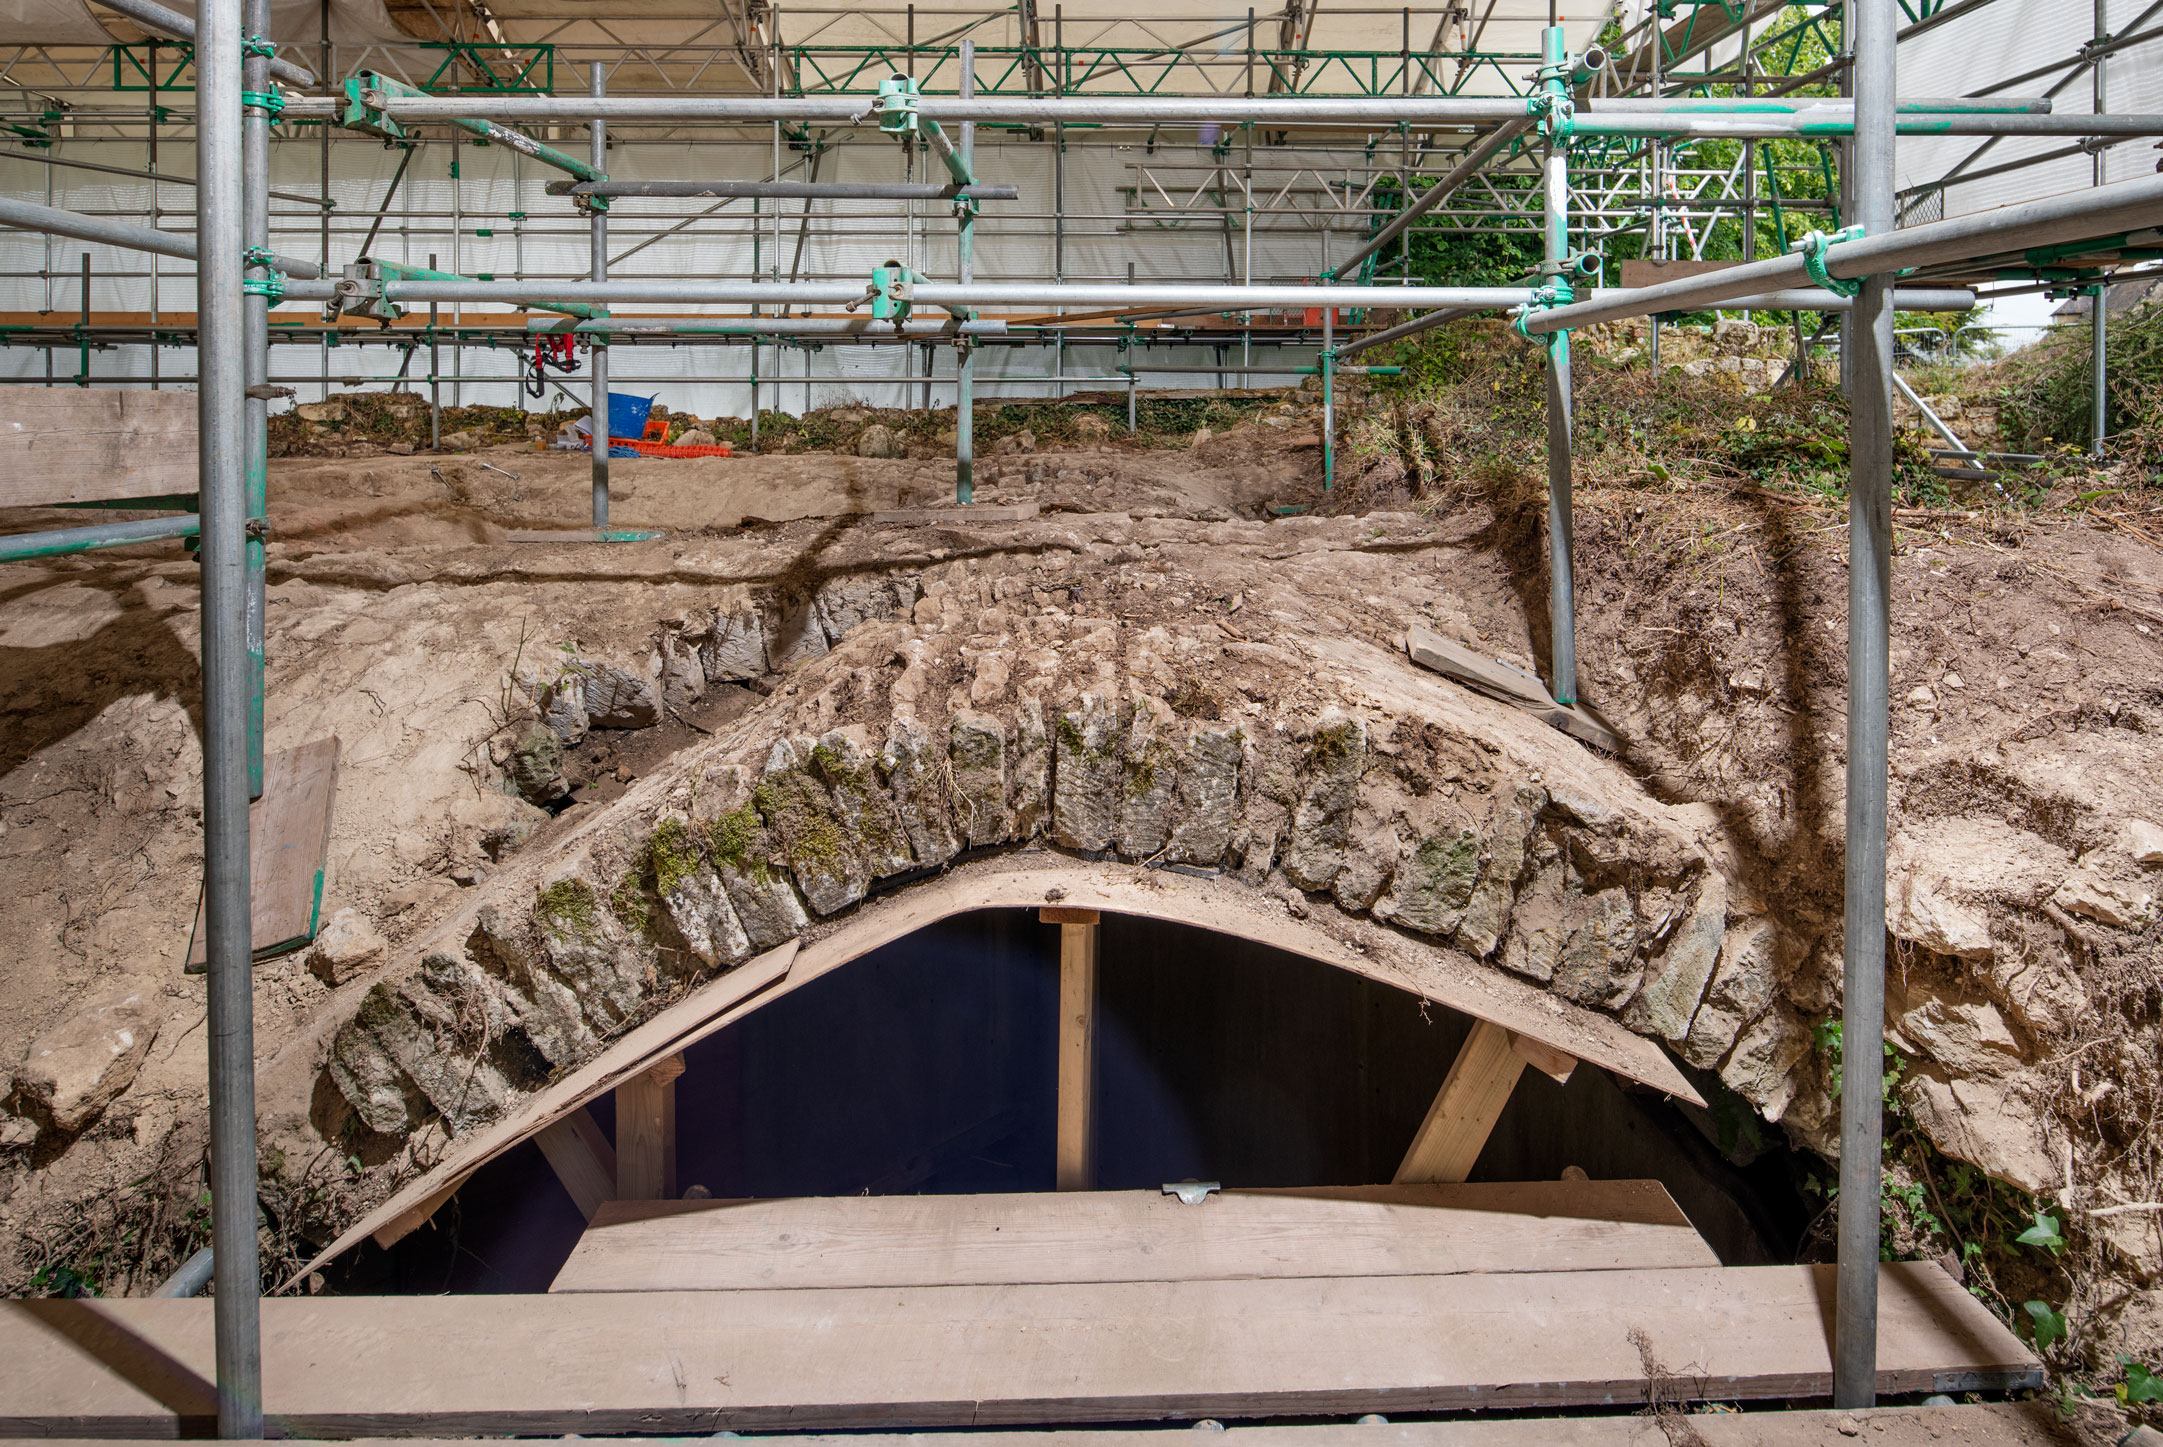 A stone vaulted undercroft under excavation, protected by plastic sheeting spanned on scaffolding.